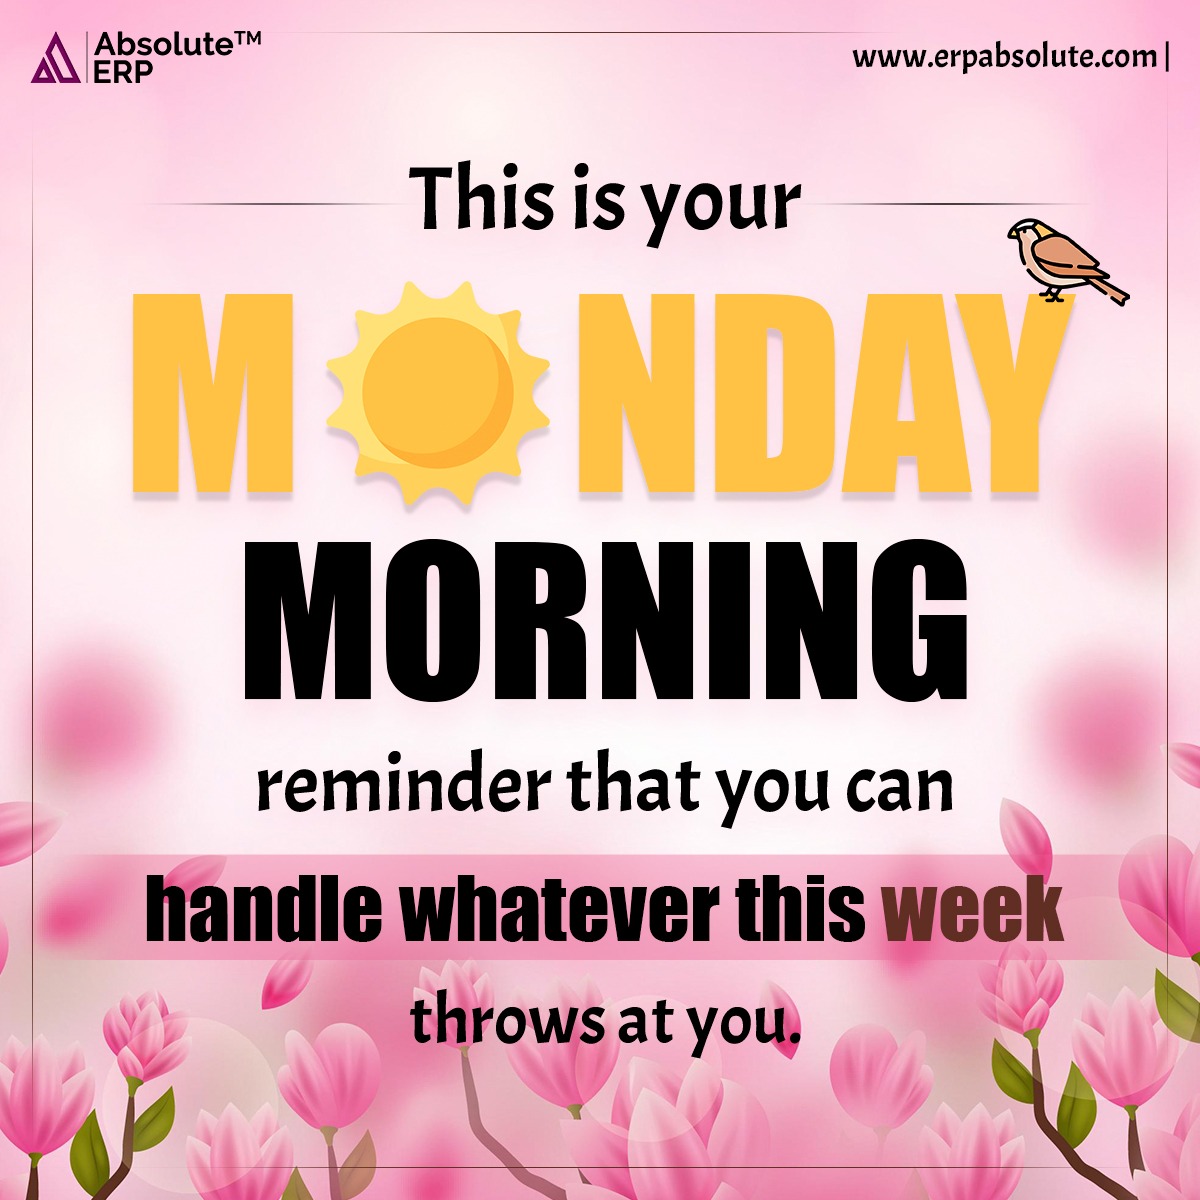 Keep your day positive and keep growing as a person. 

#mondaymotivation #monday #Absoluteerp #mondaymood #motivation #mondayvibes #mondaymorning #mondayquotes #happymonday #positivevibes #motivationmonday #inspiration #positivity #keepgrowing